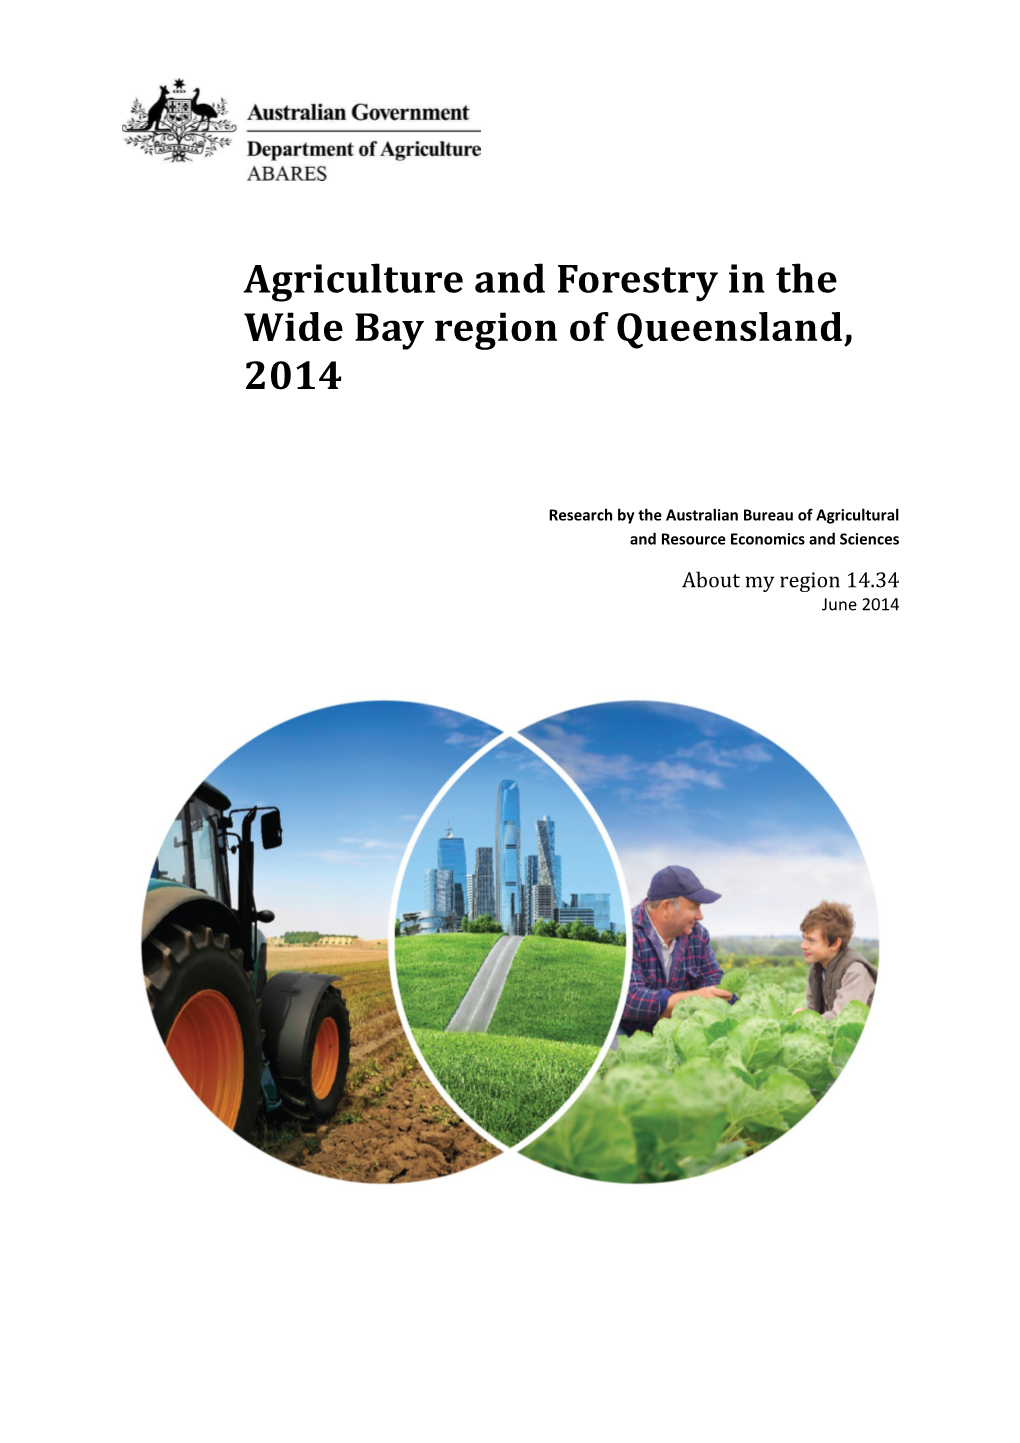 Agriculture and Forestry in the Wide Bay Region of Queensland, 2014